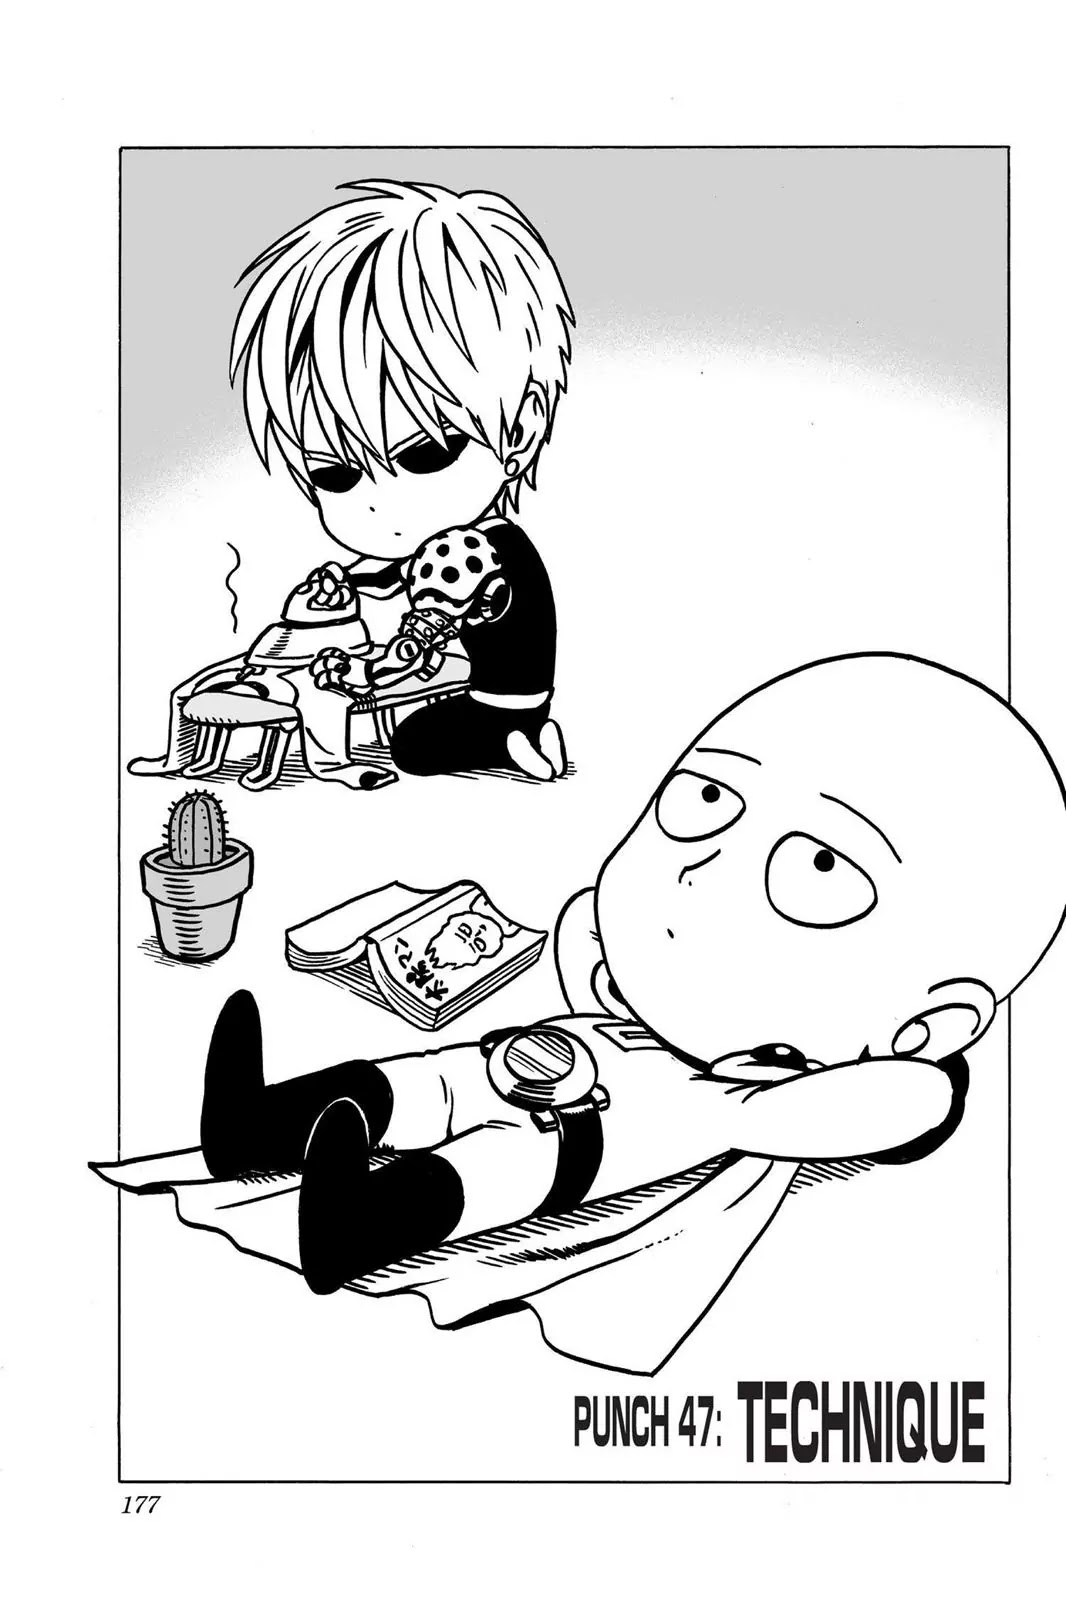 One Punch Man, Chapter 47 Technique image 01